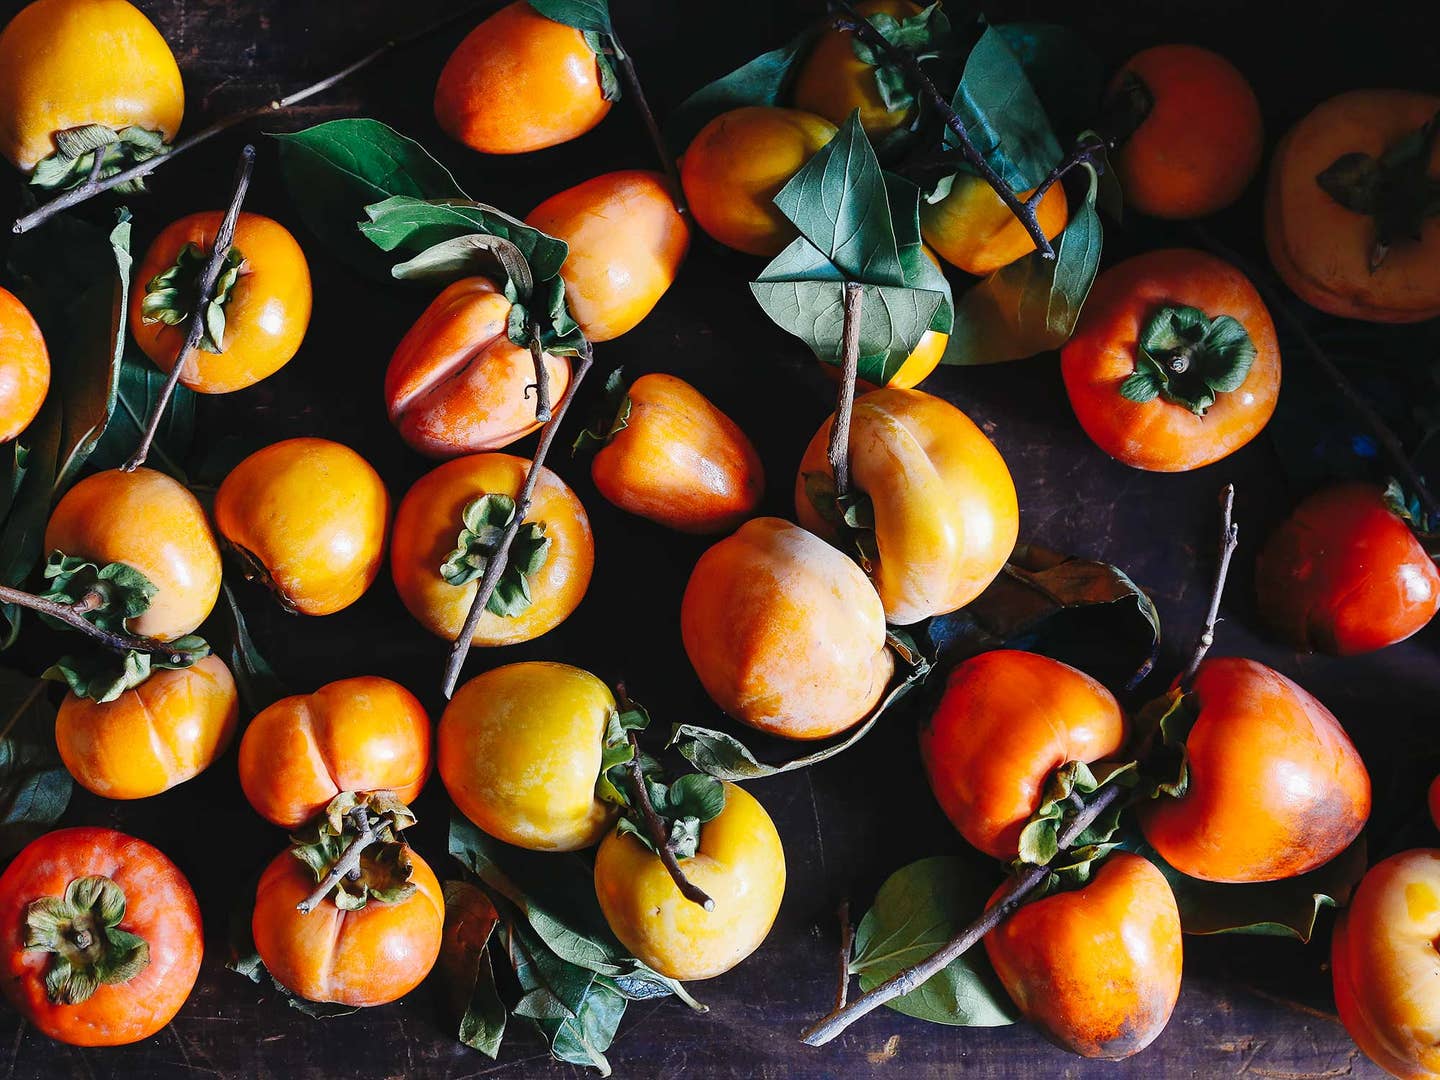 Stop What You’re Doing and Eat All the Persimmons You Can